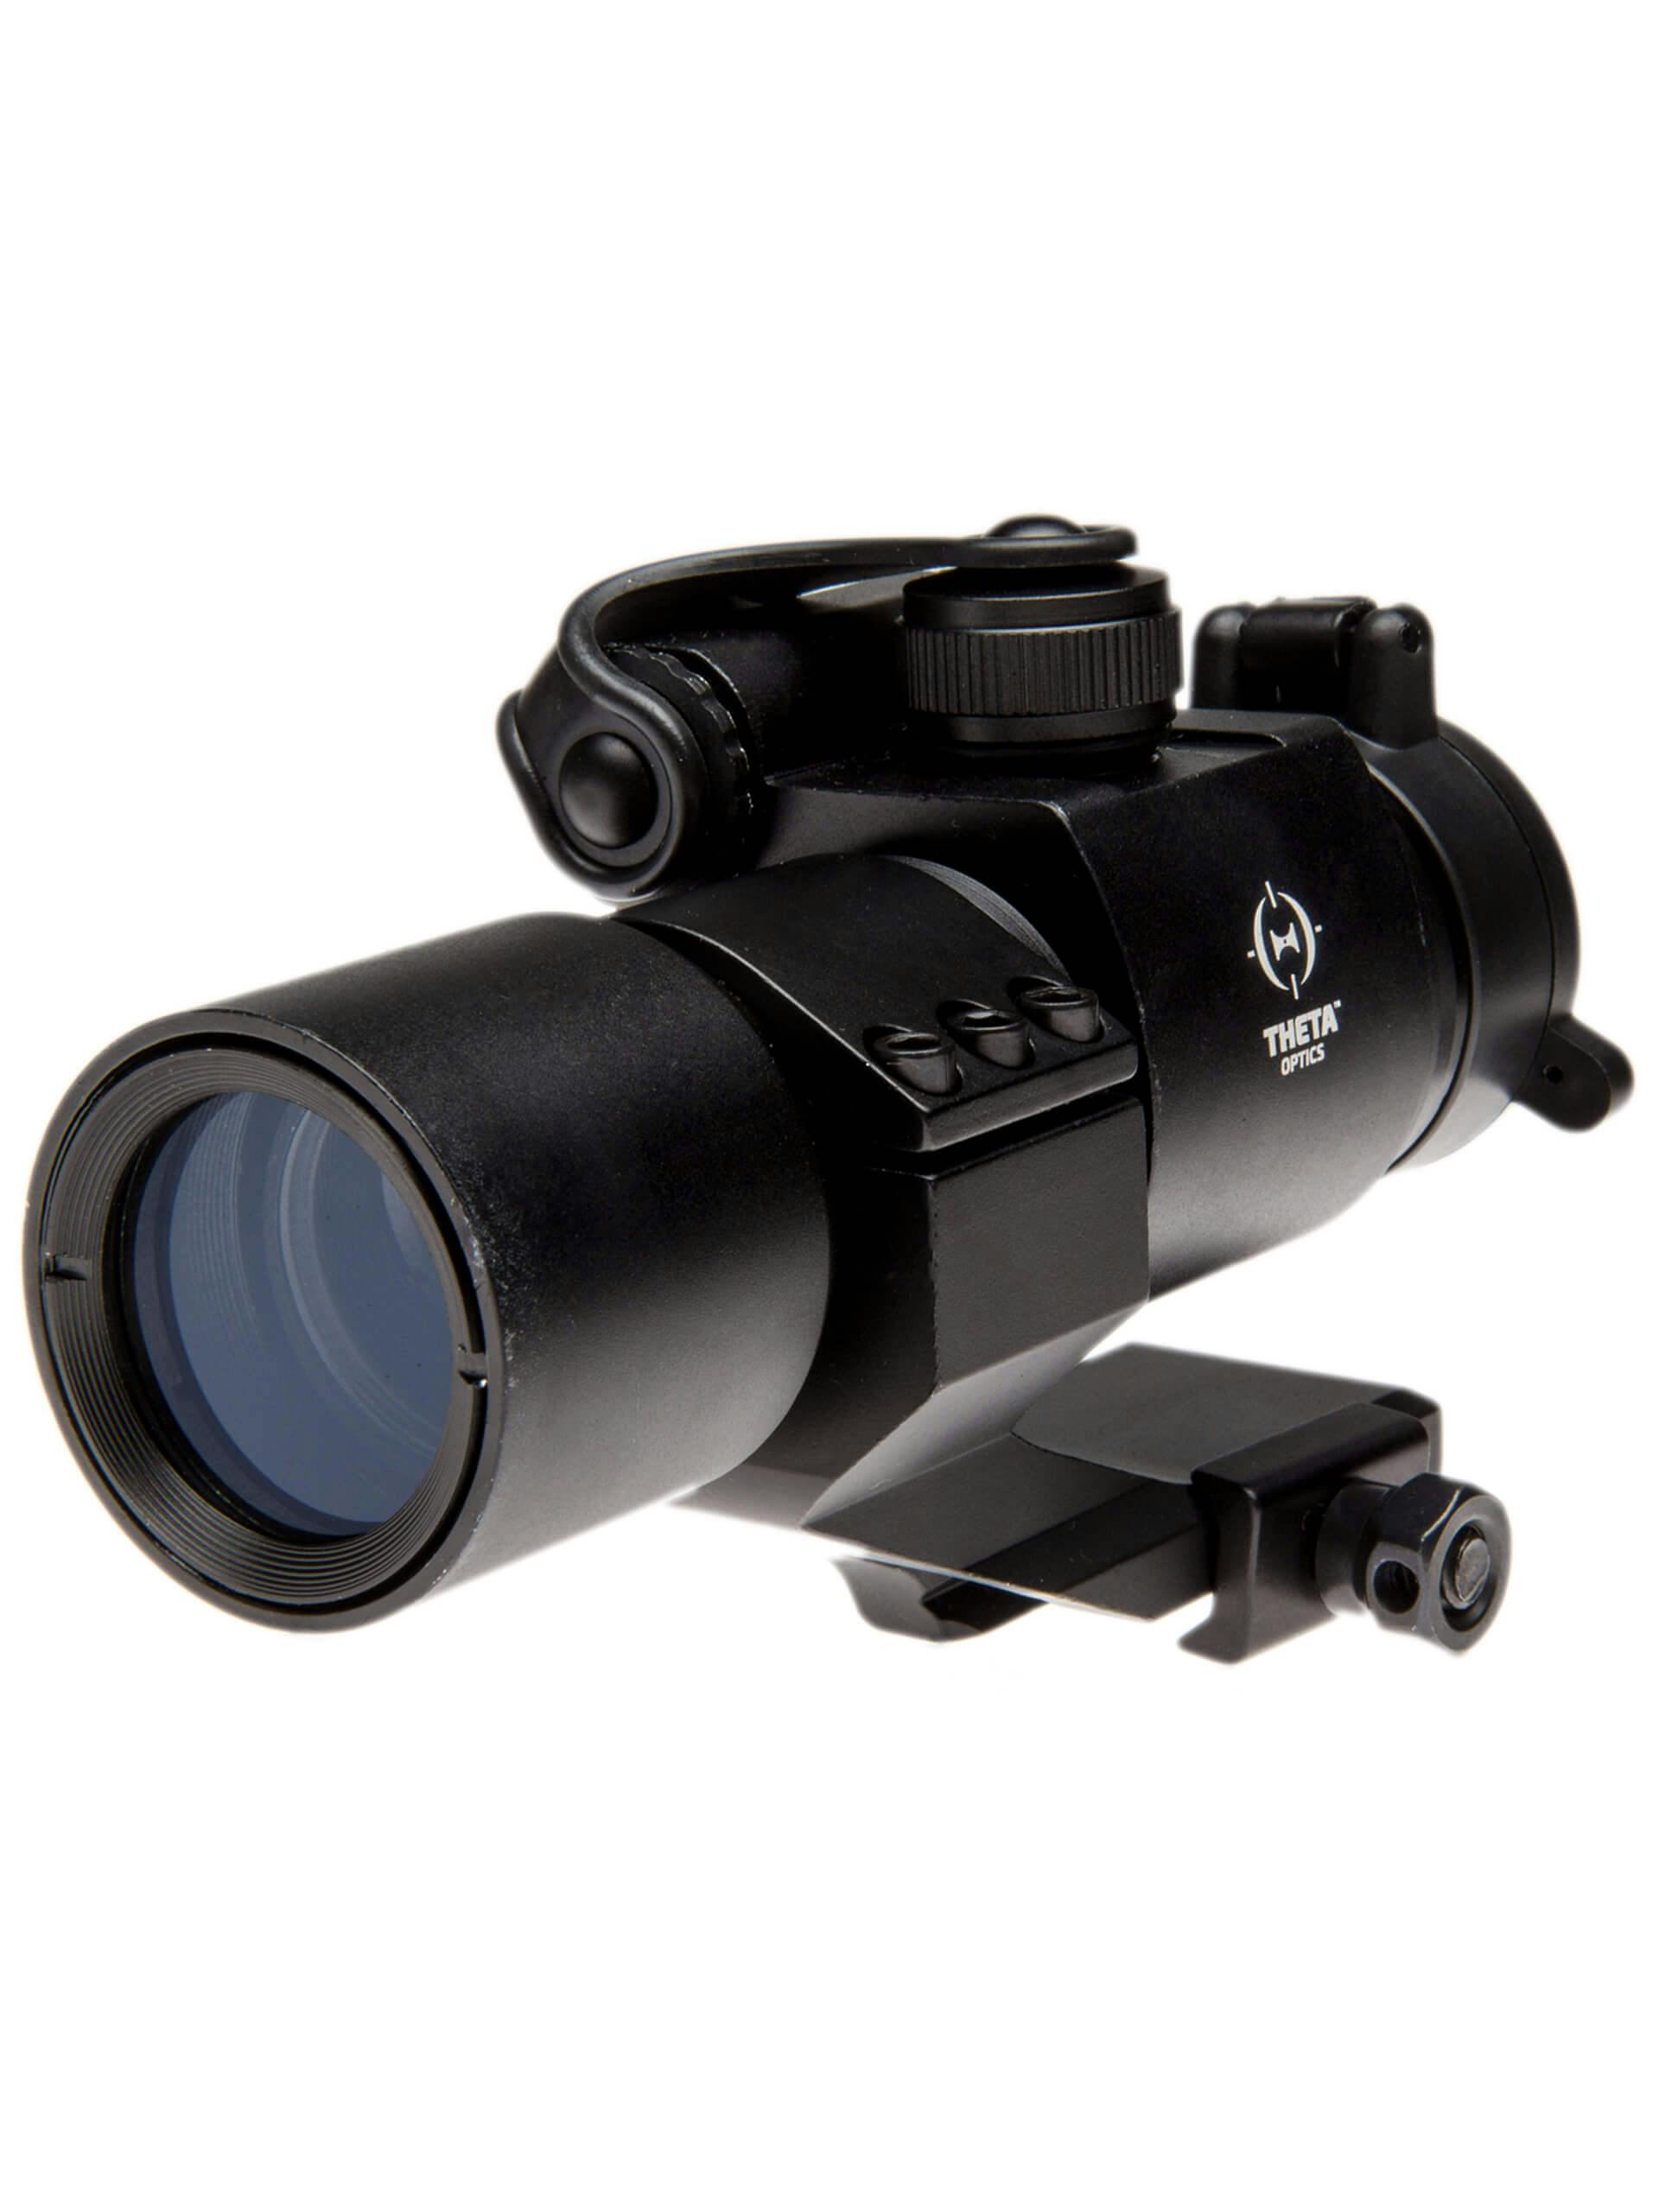 with 20mm Rail Red Green Dot Sight Scope ，with 4 Adjustable Marking Lines 